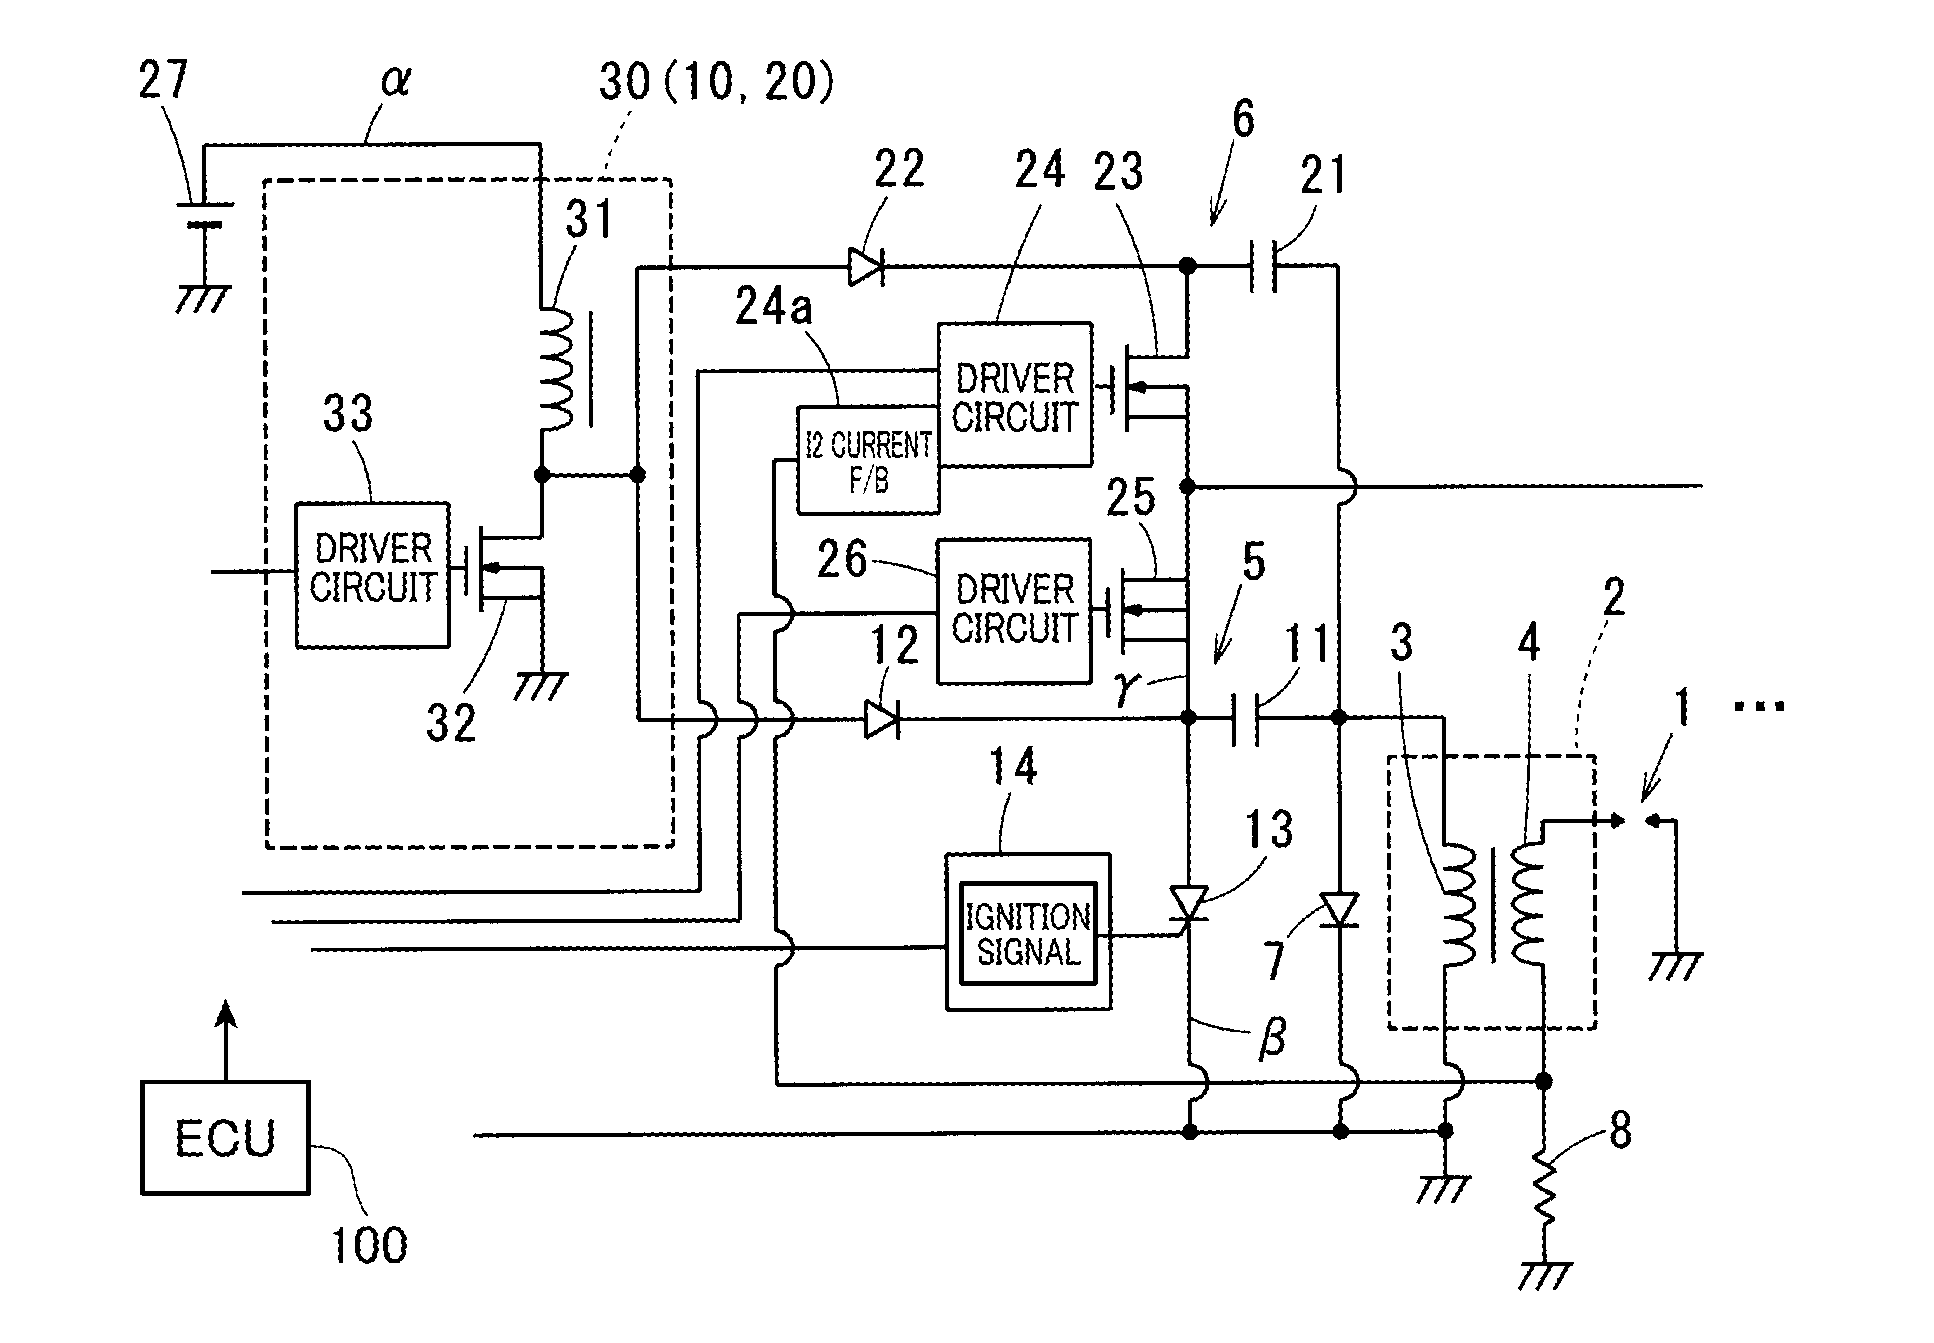 Ignition apparatus for an internal-combustion engine